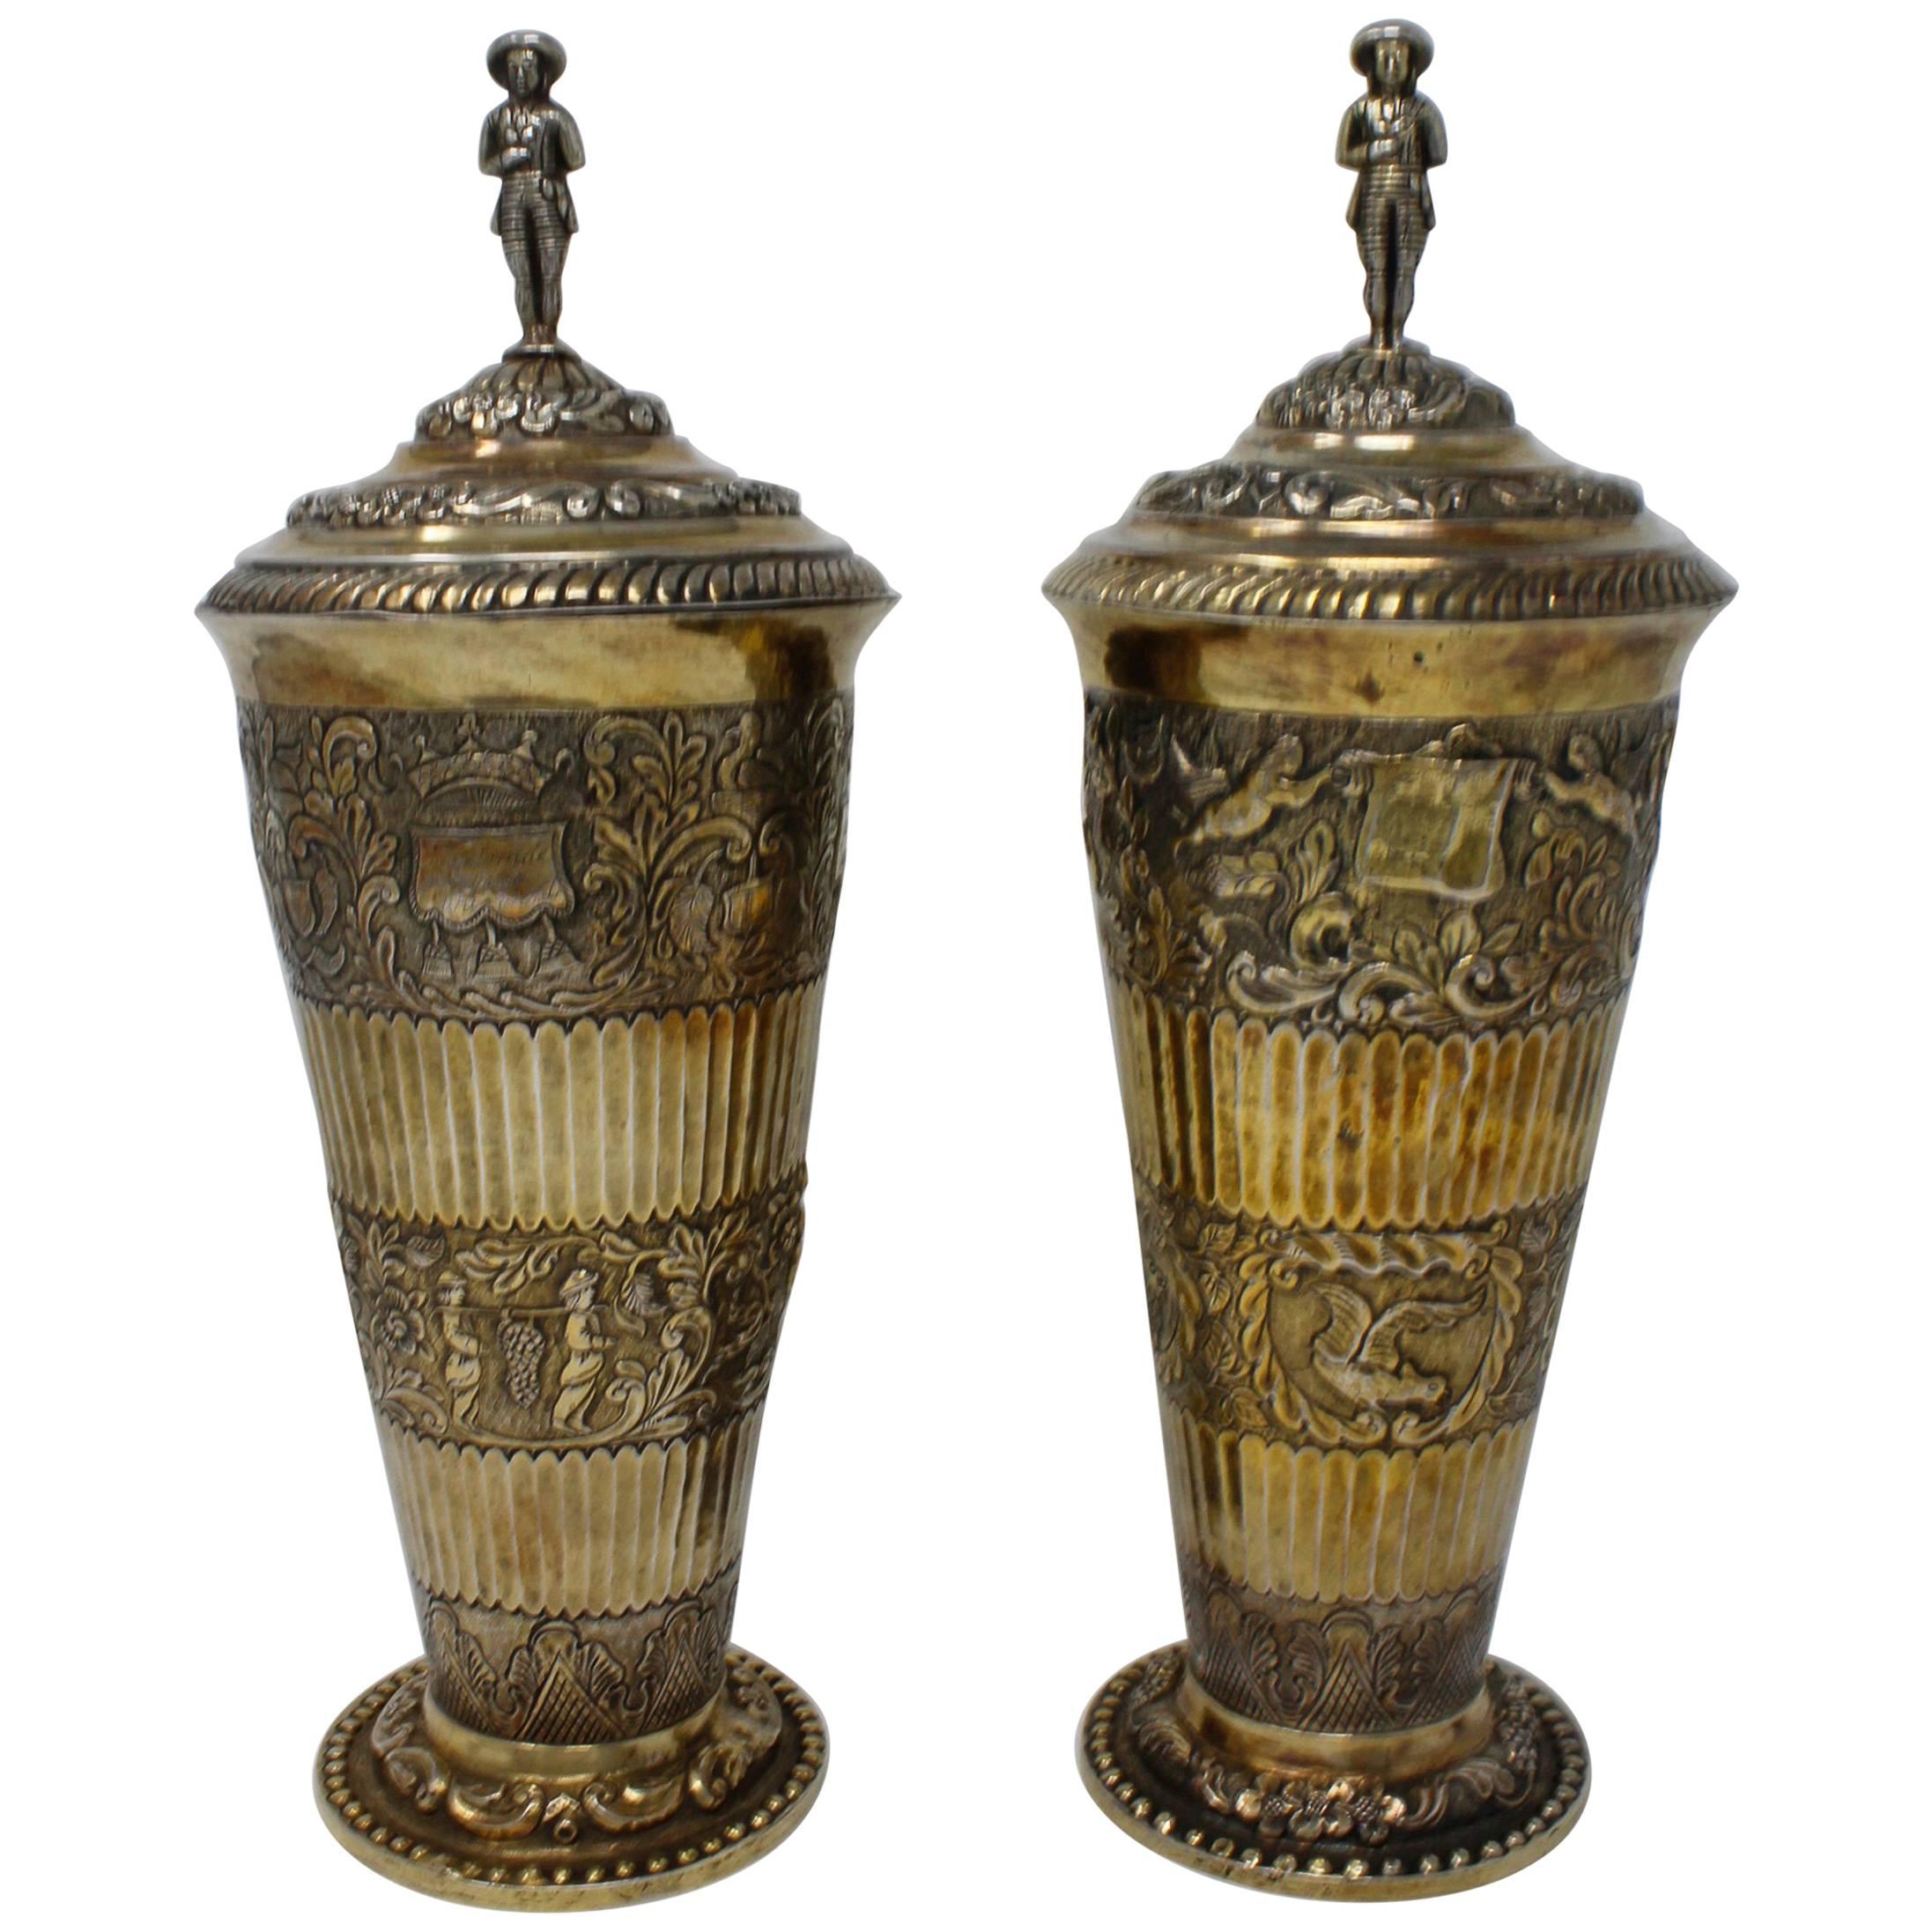 Covered Vases with Removable Lids, Gilt Silver, German in 17th Century Style For Sale